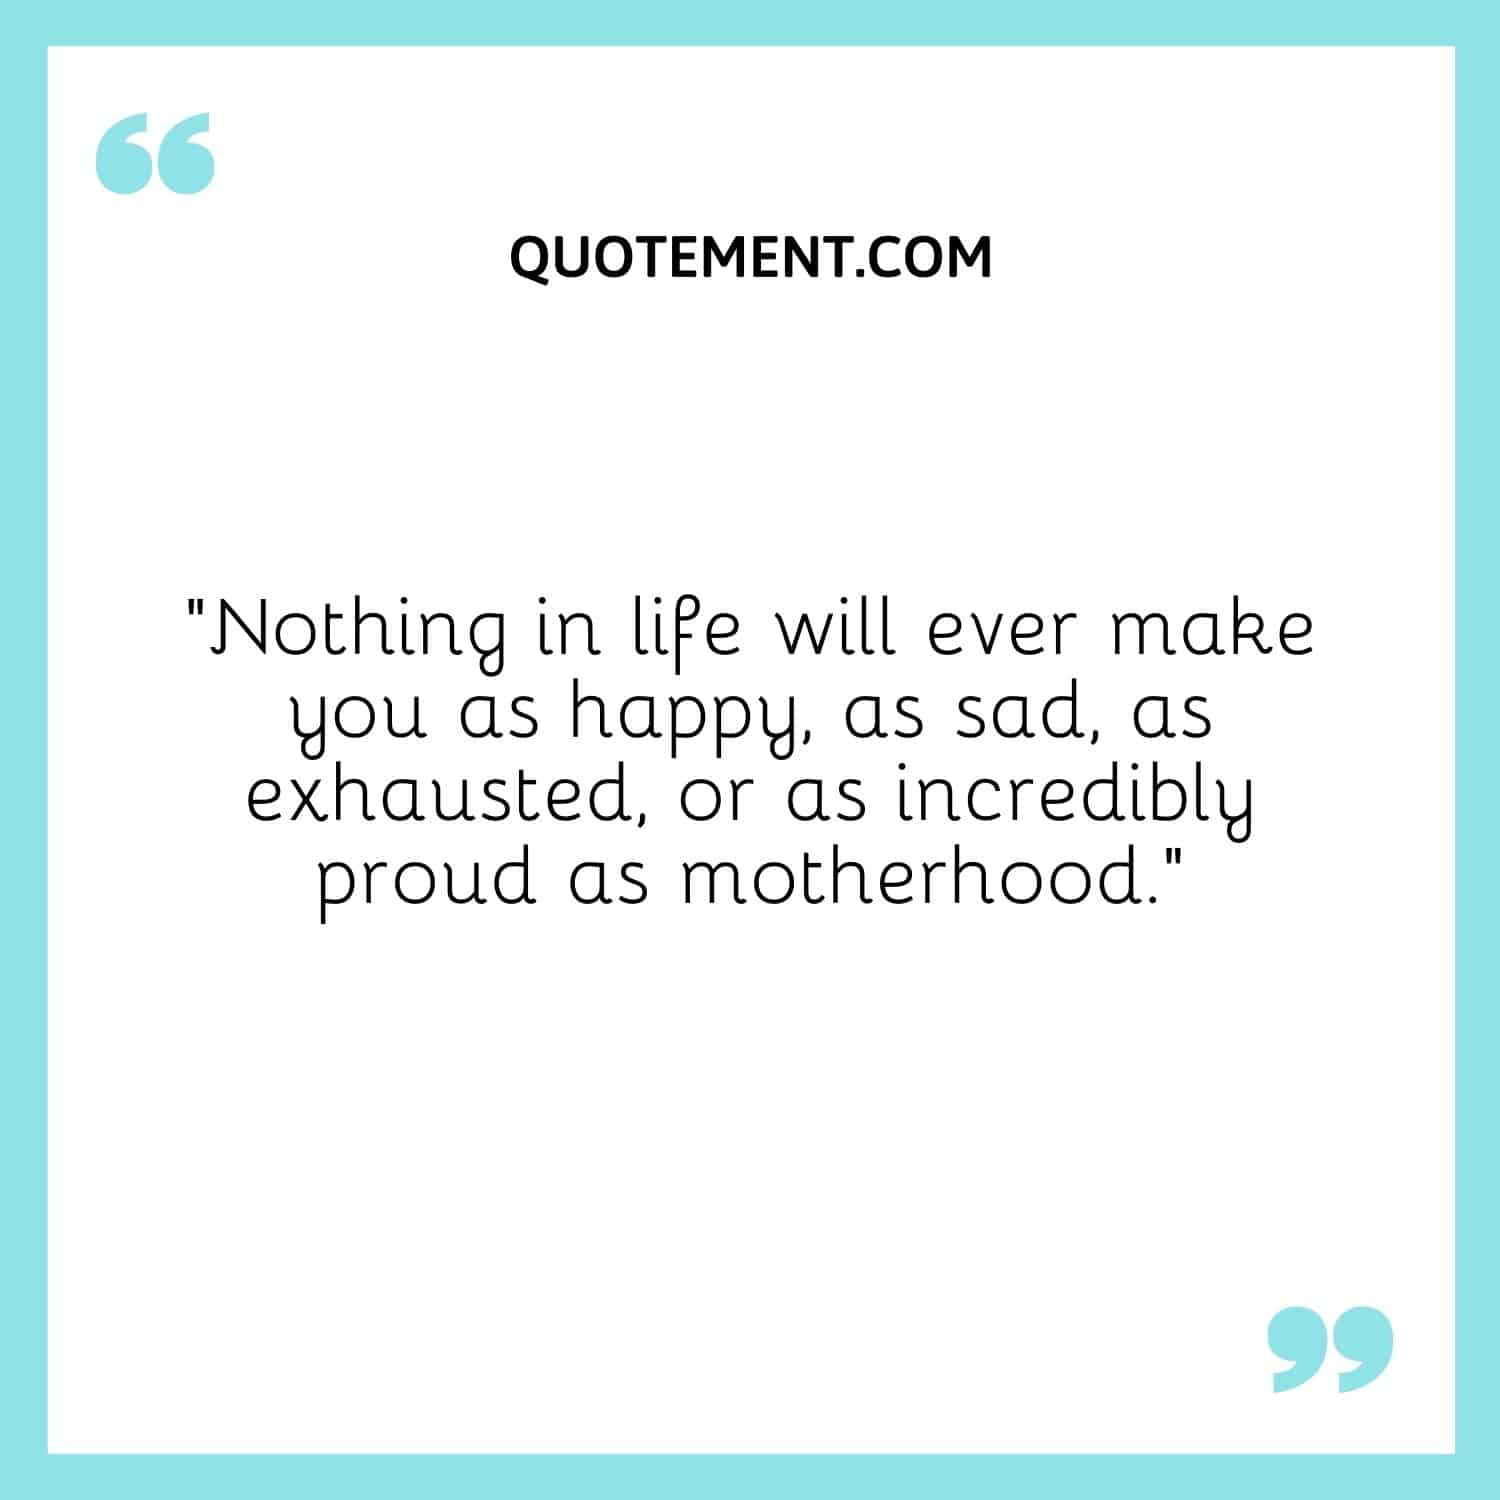 Nothing in life will ever make you as happy, as sad, as exhausted, or as incredibly proud as motherhood